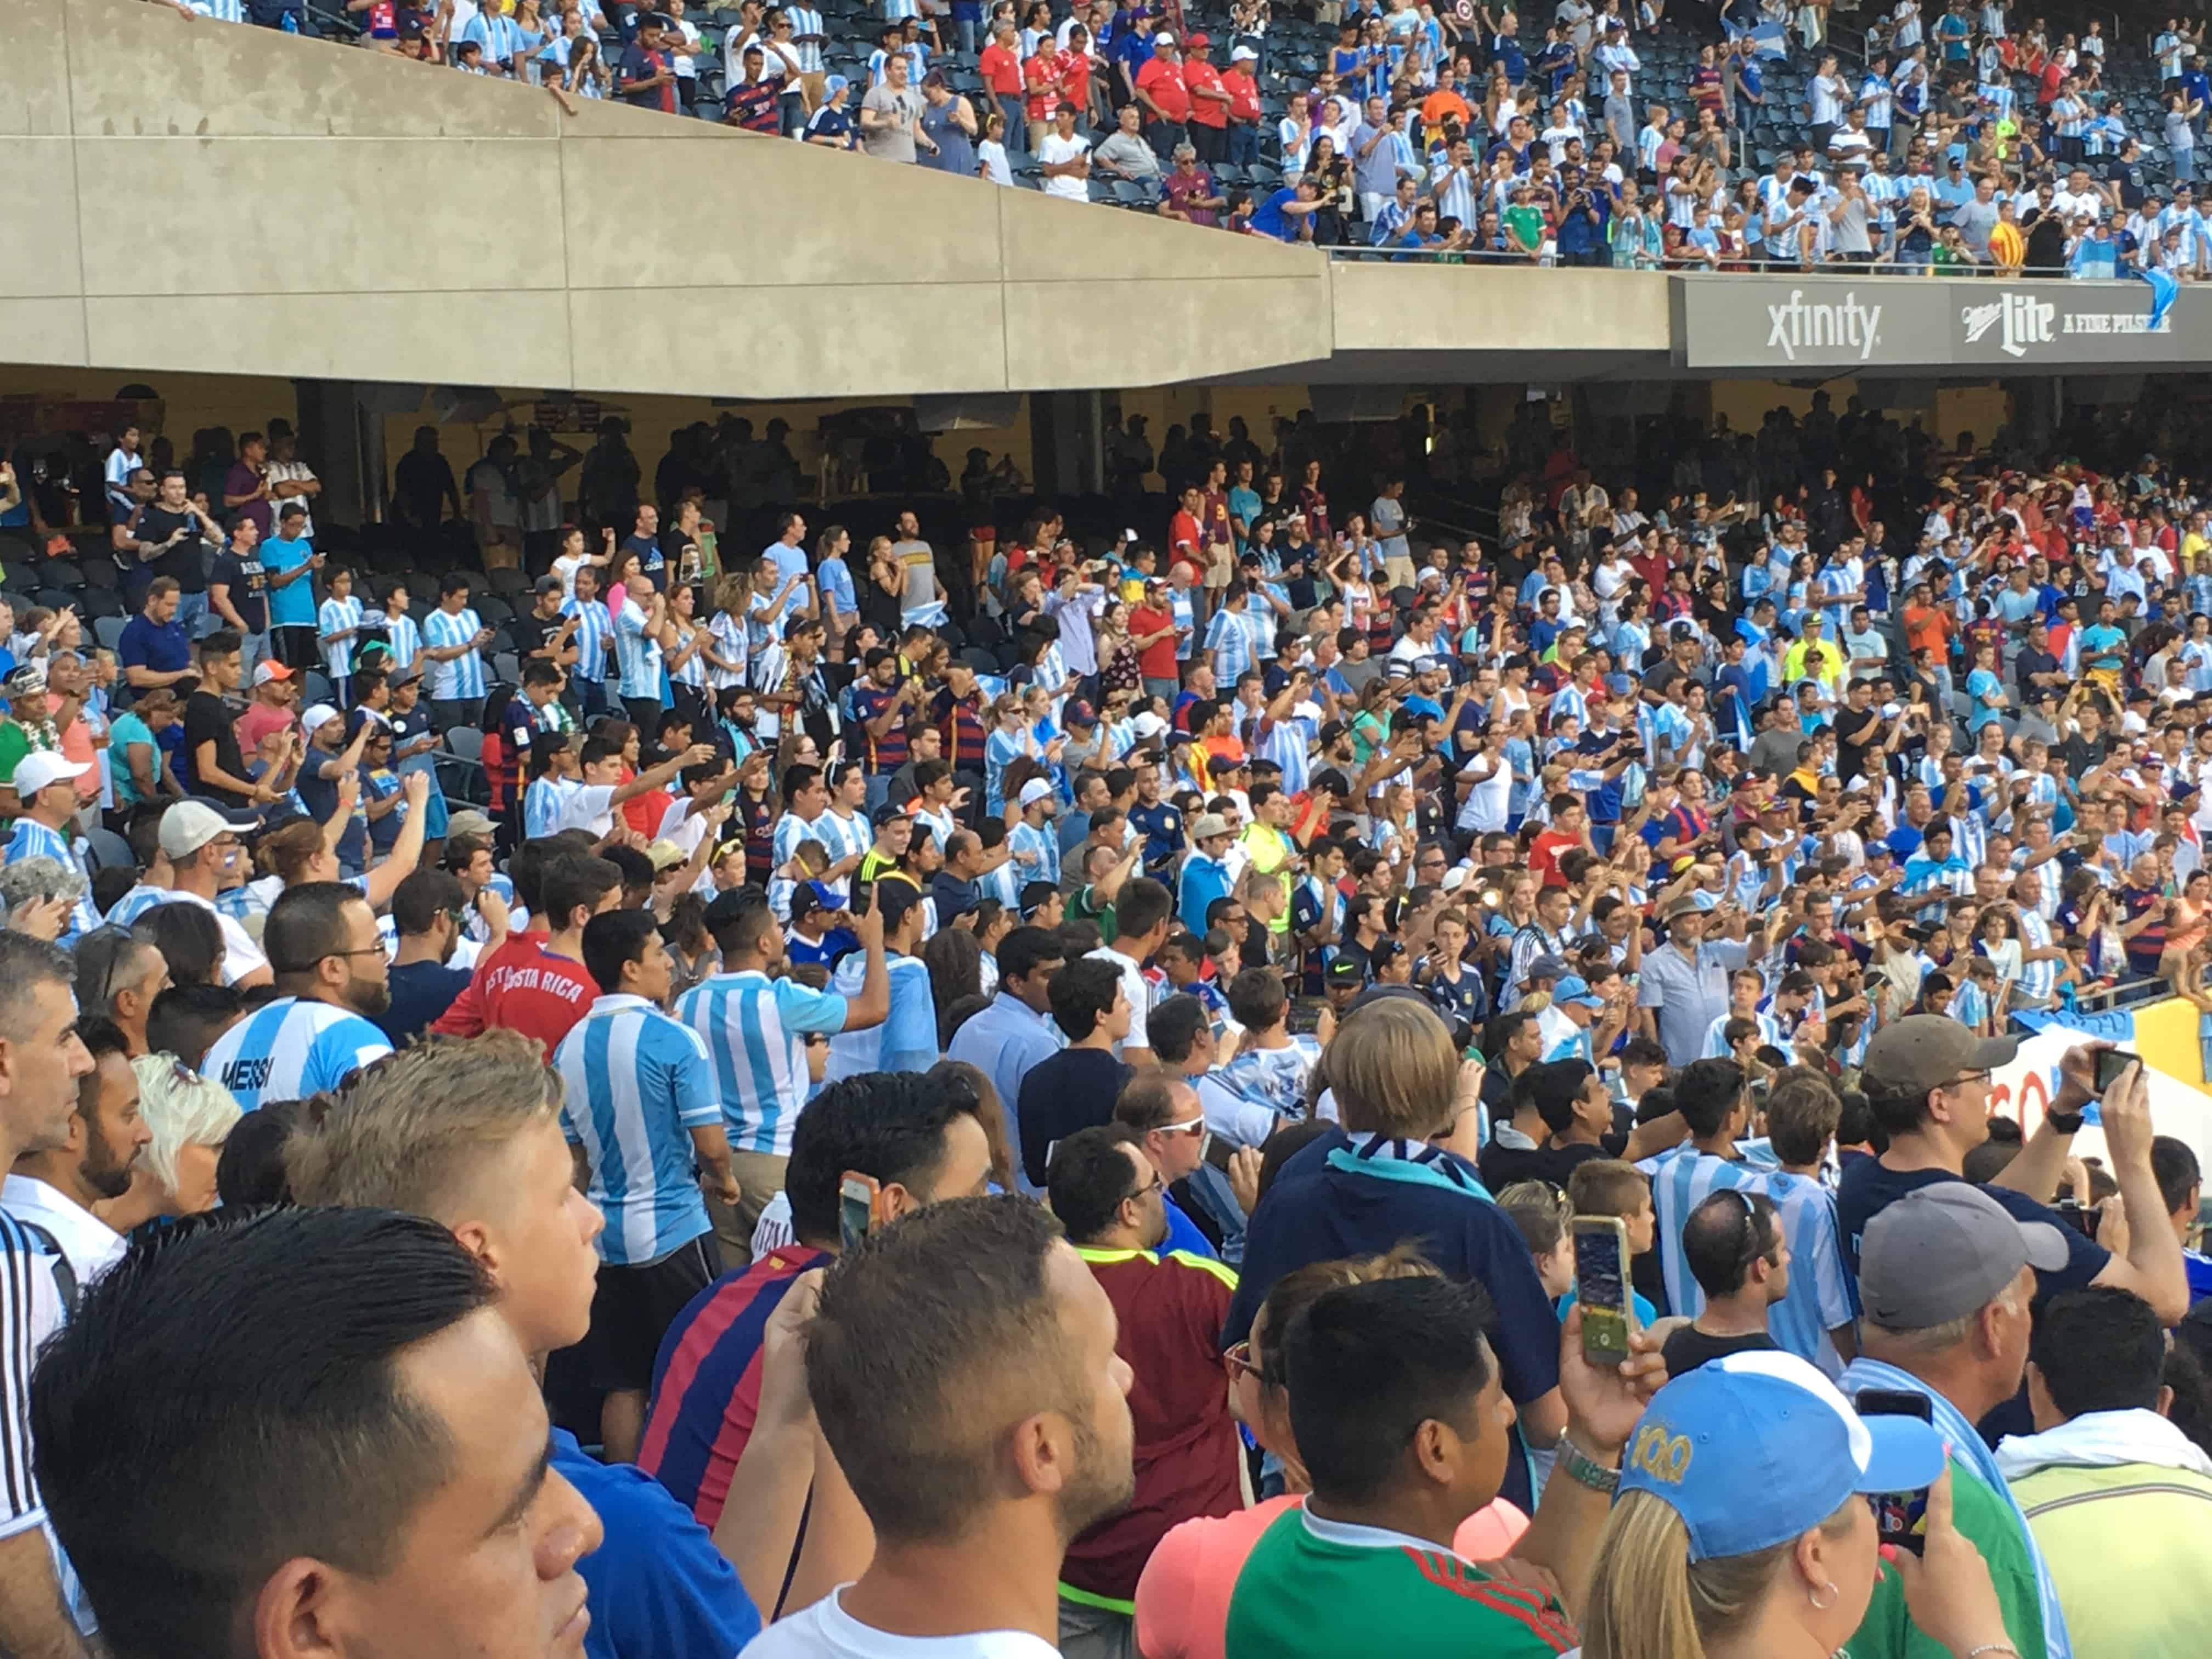 Argentina fans at Copa América Centenario USA 2016 at Soldier Field in Chicago, Illinois